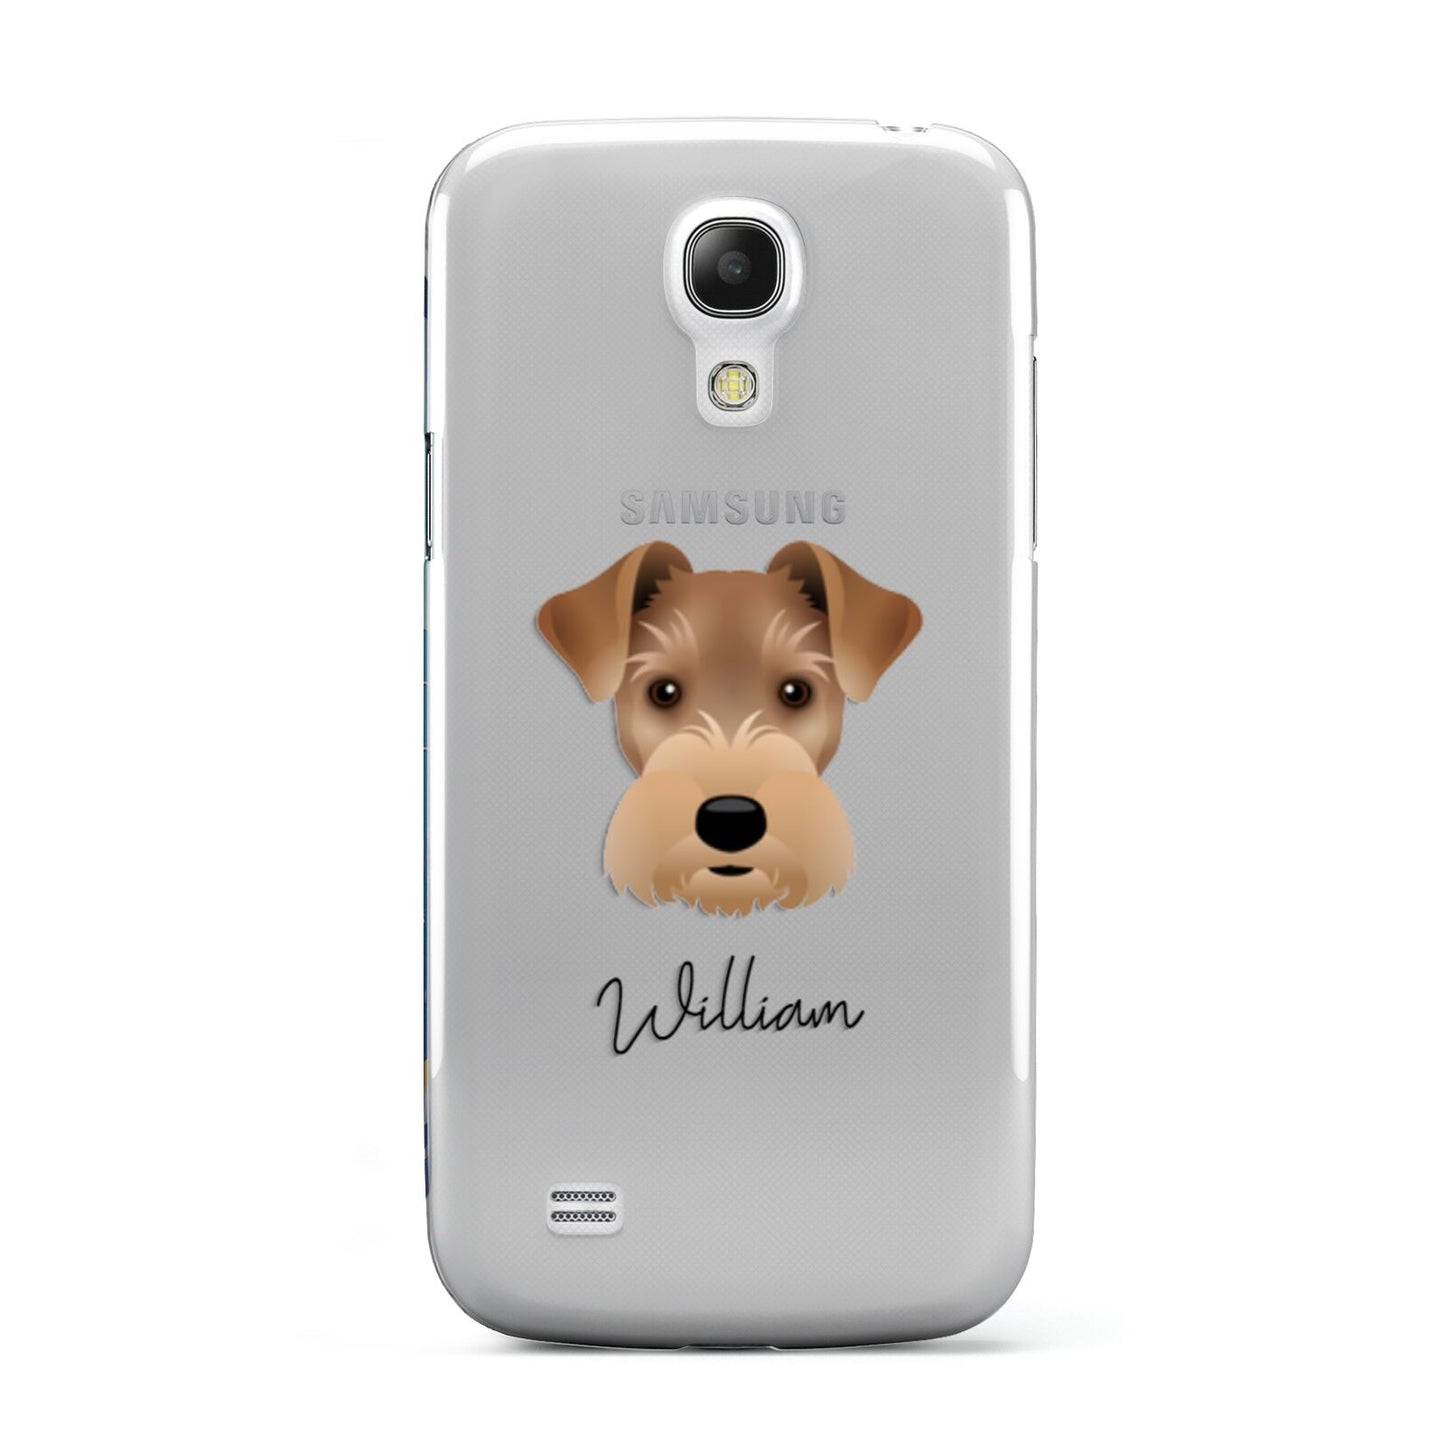 Welsh Terrier Personalised Samsung Galaxy S4 Mini Case